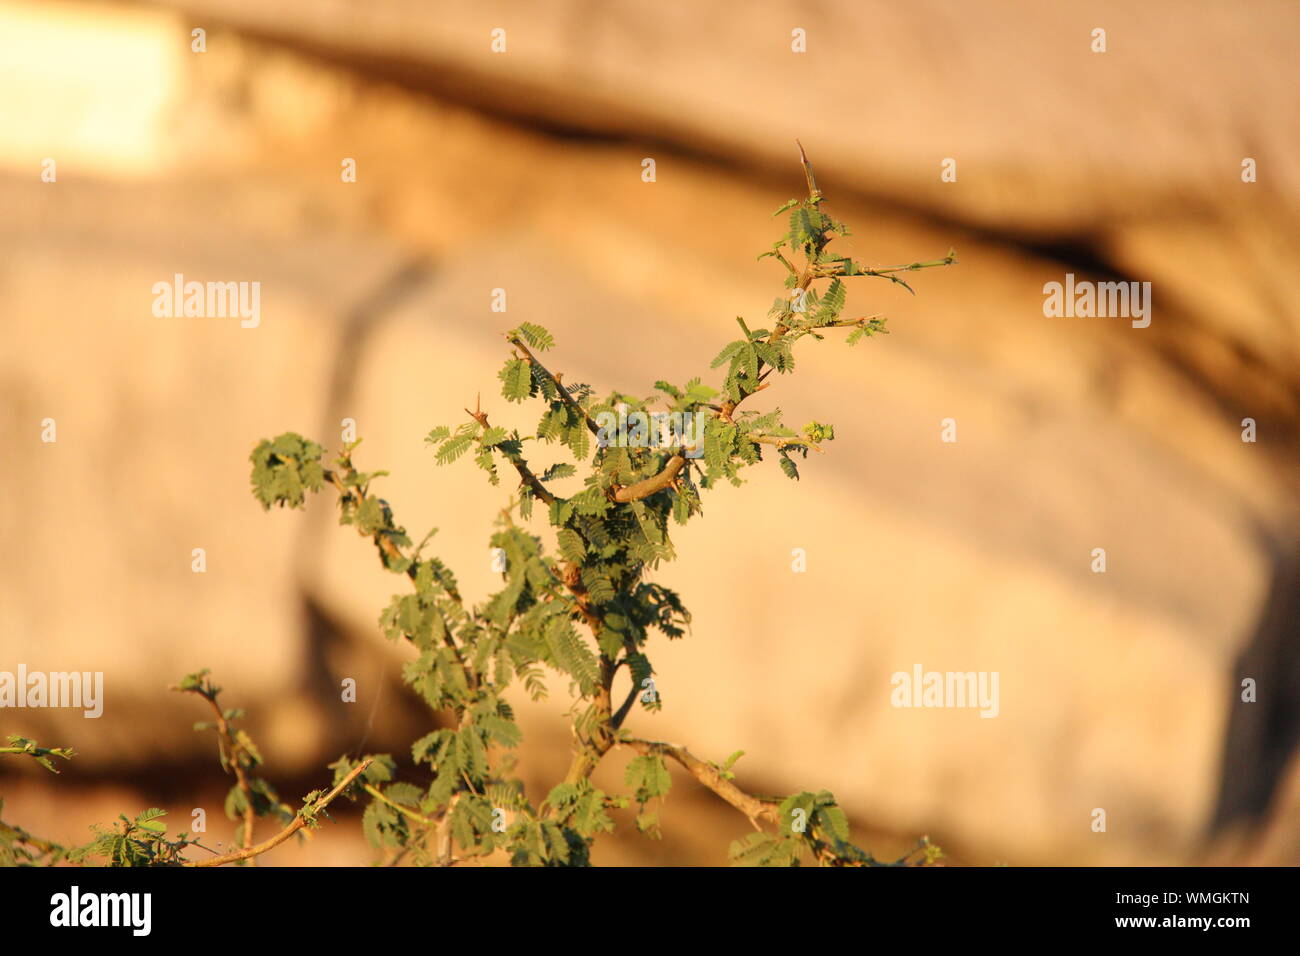 Plant Growing In Remote Area Stock Photo